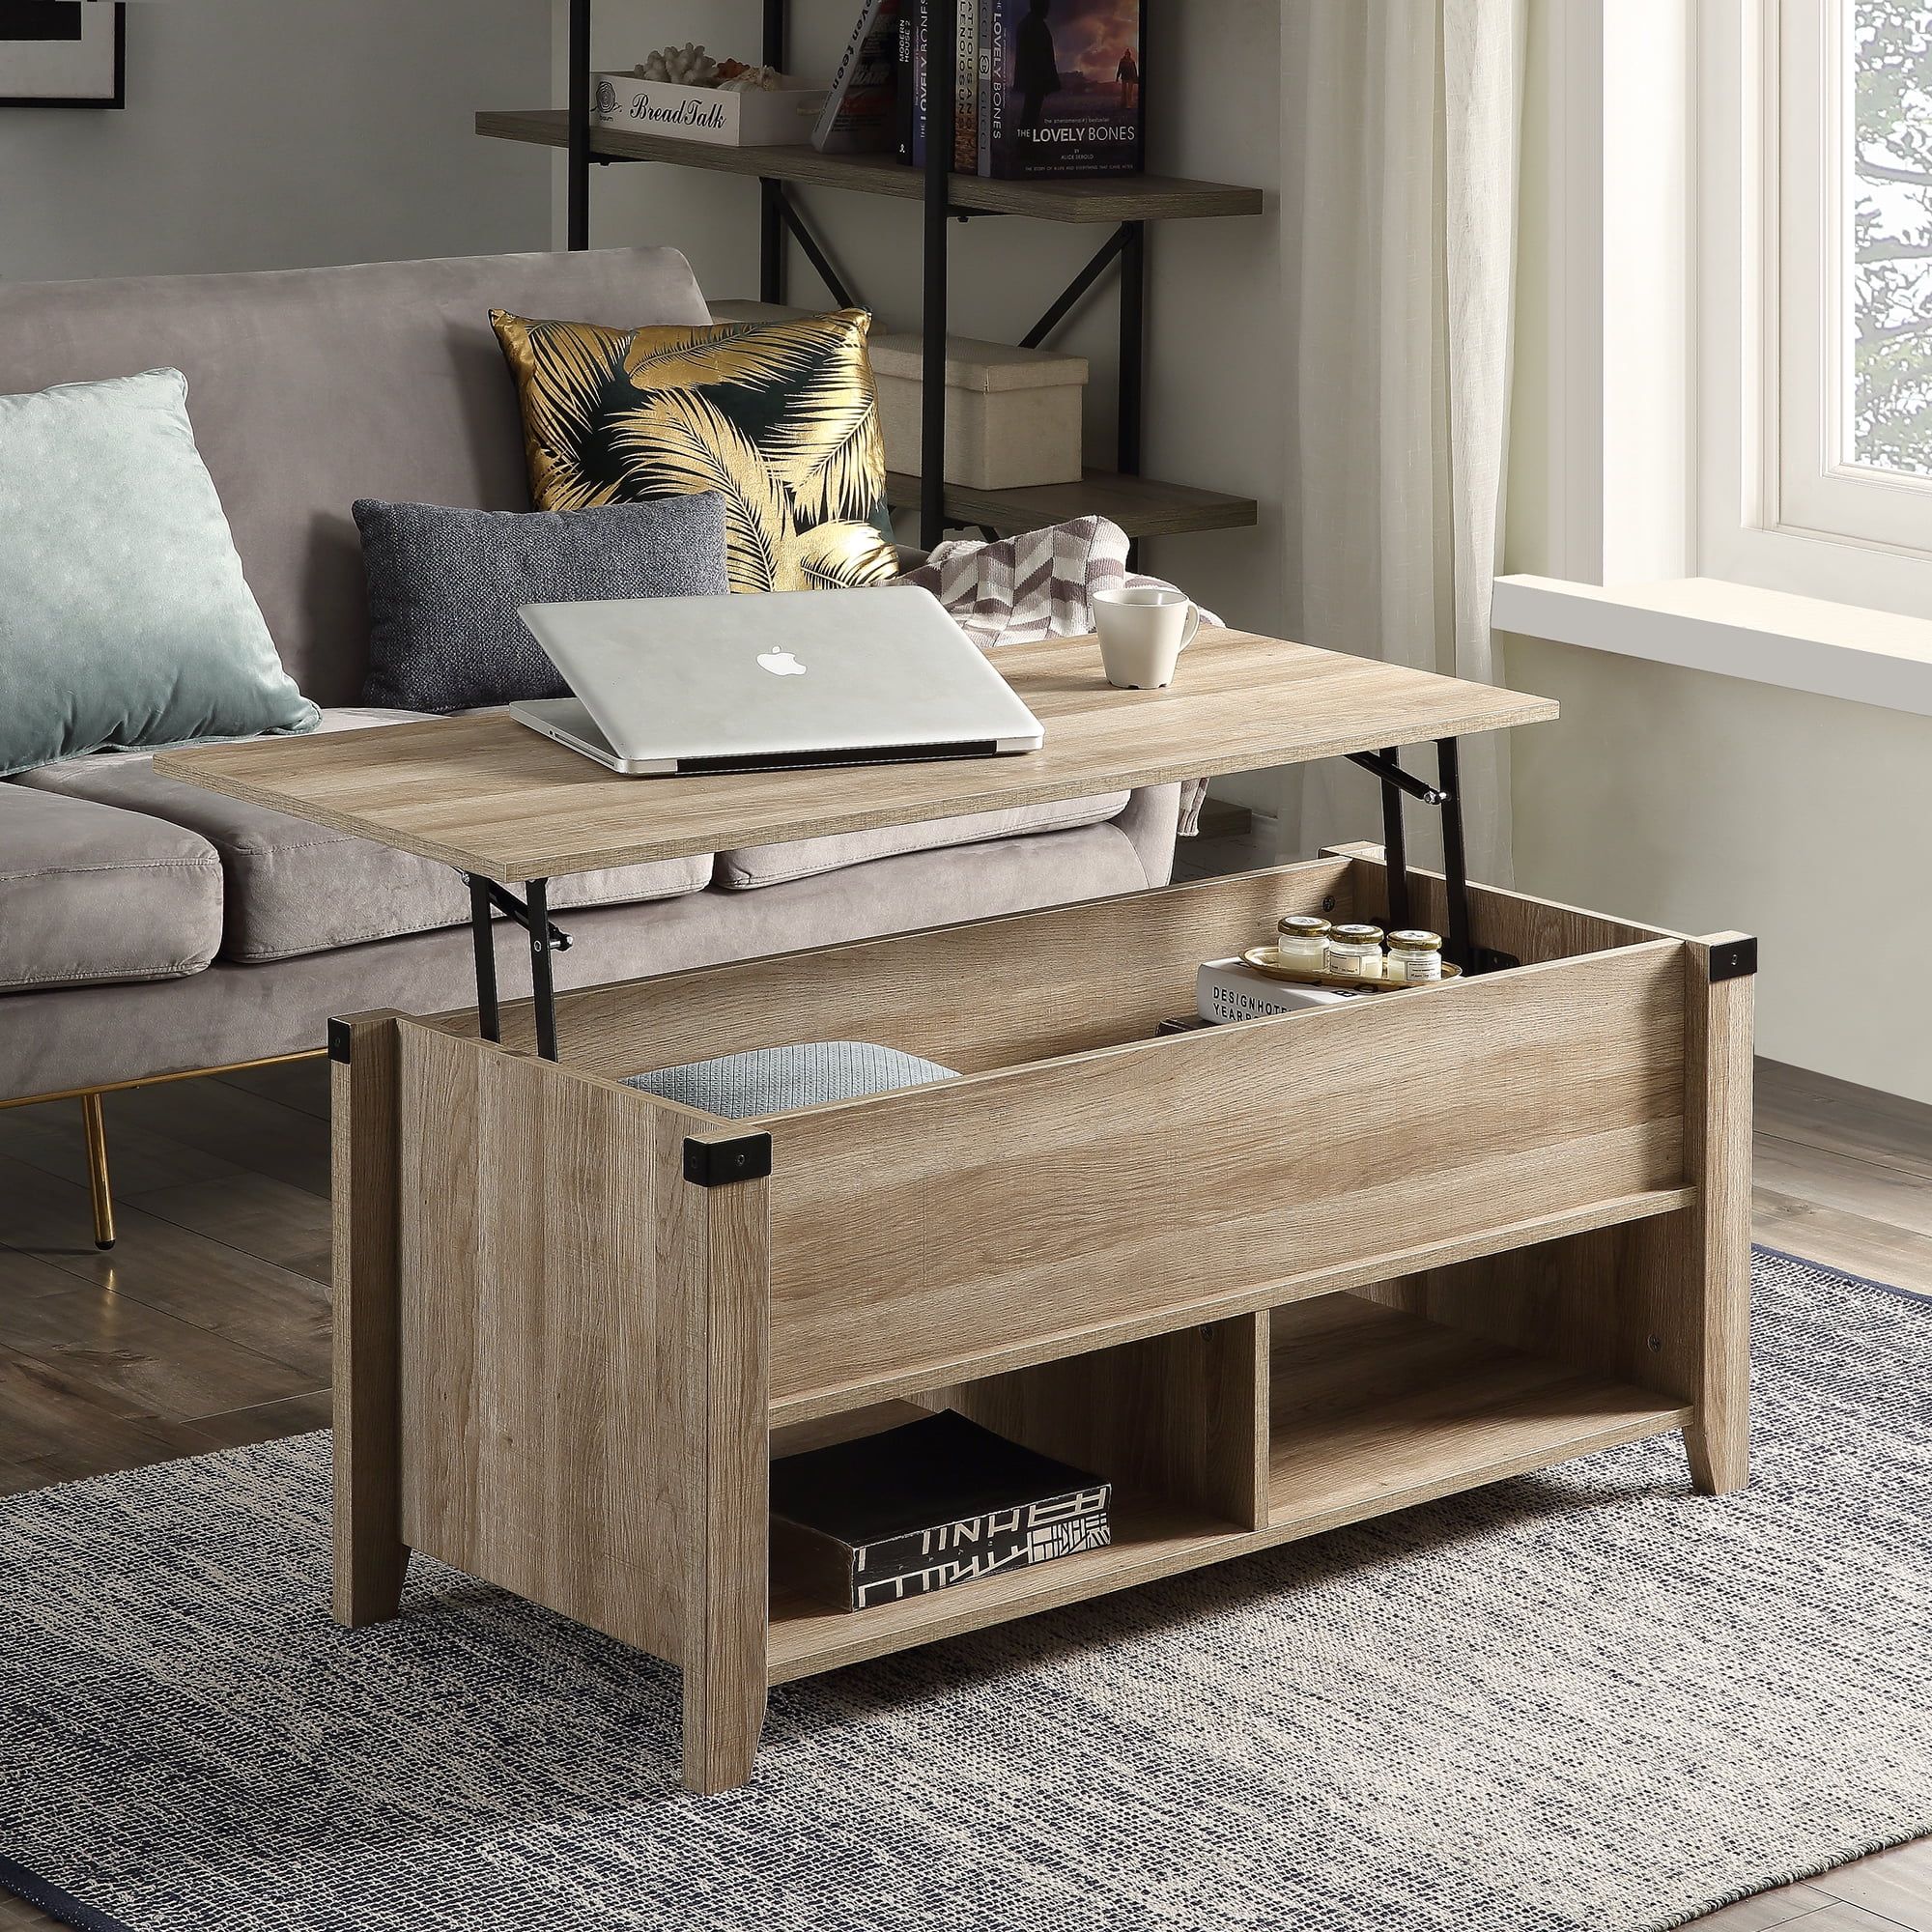 Multipurpose Coffee Table With Drawers ,open Shelf And Storage, Lifting Regarding Freestanding Tables With Drawers (View 5 of 20)